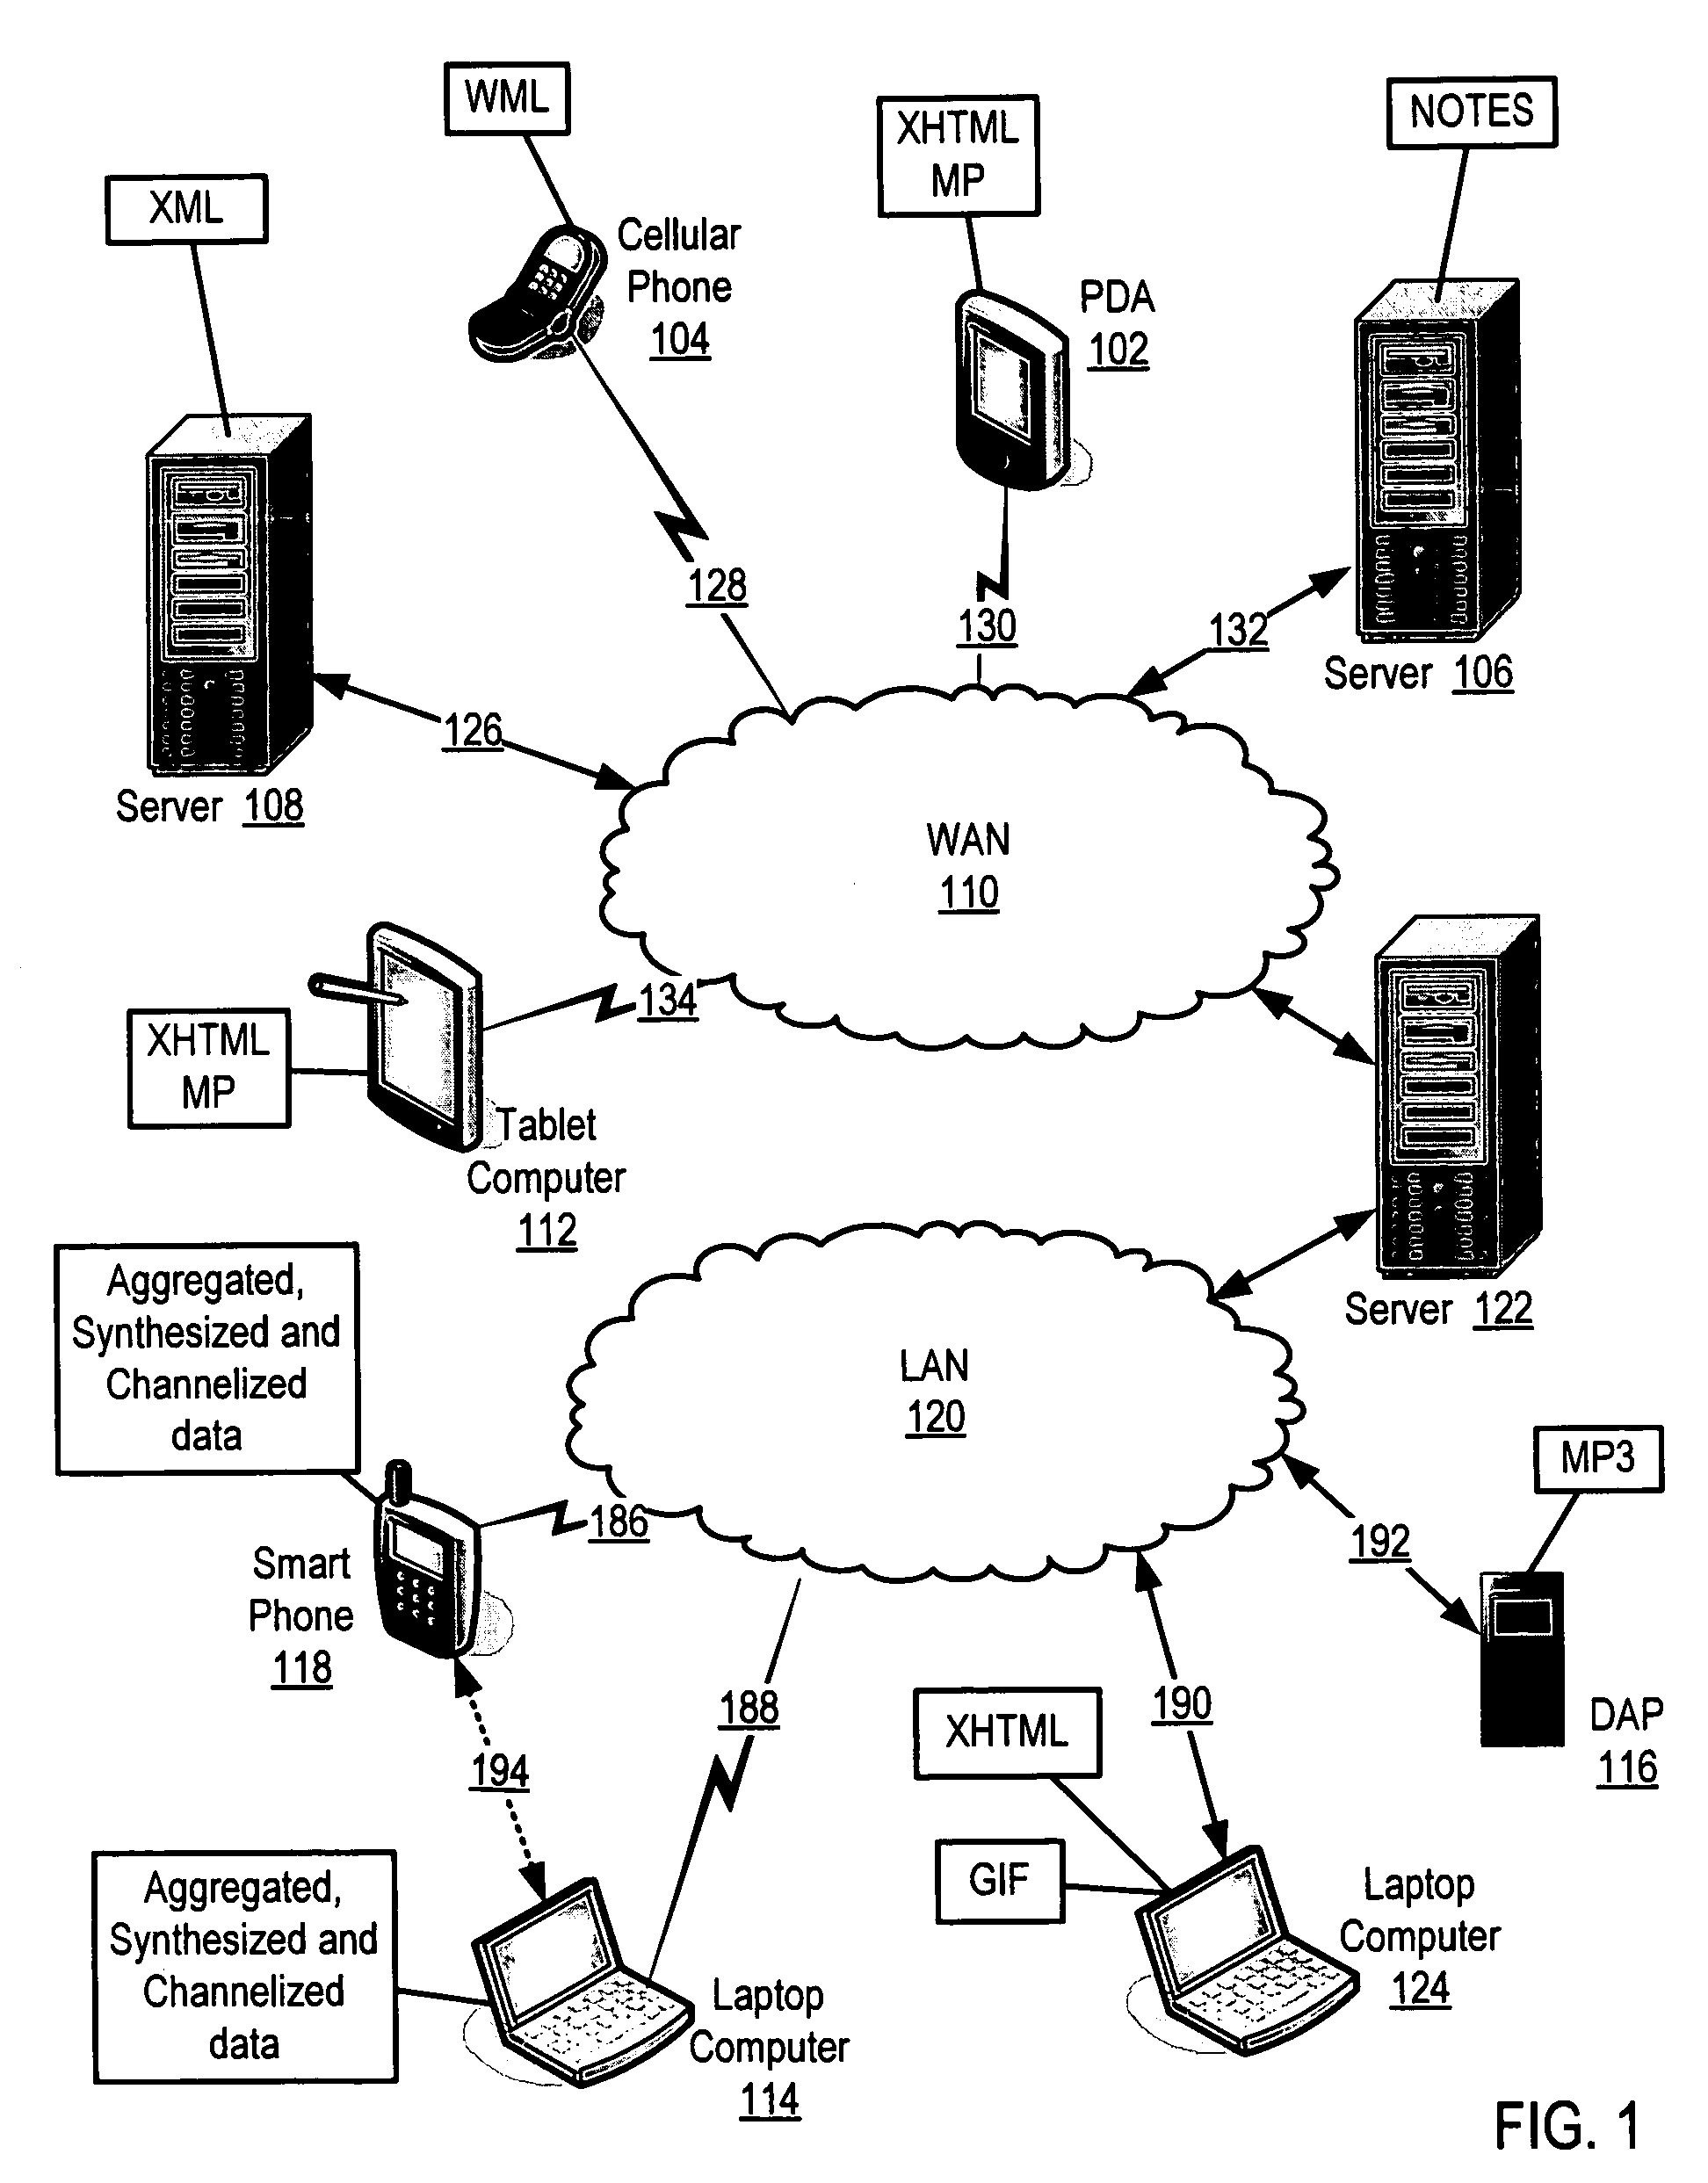 Controlling audio operation for data management and data rendering